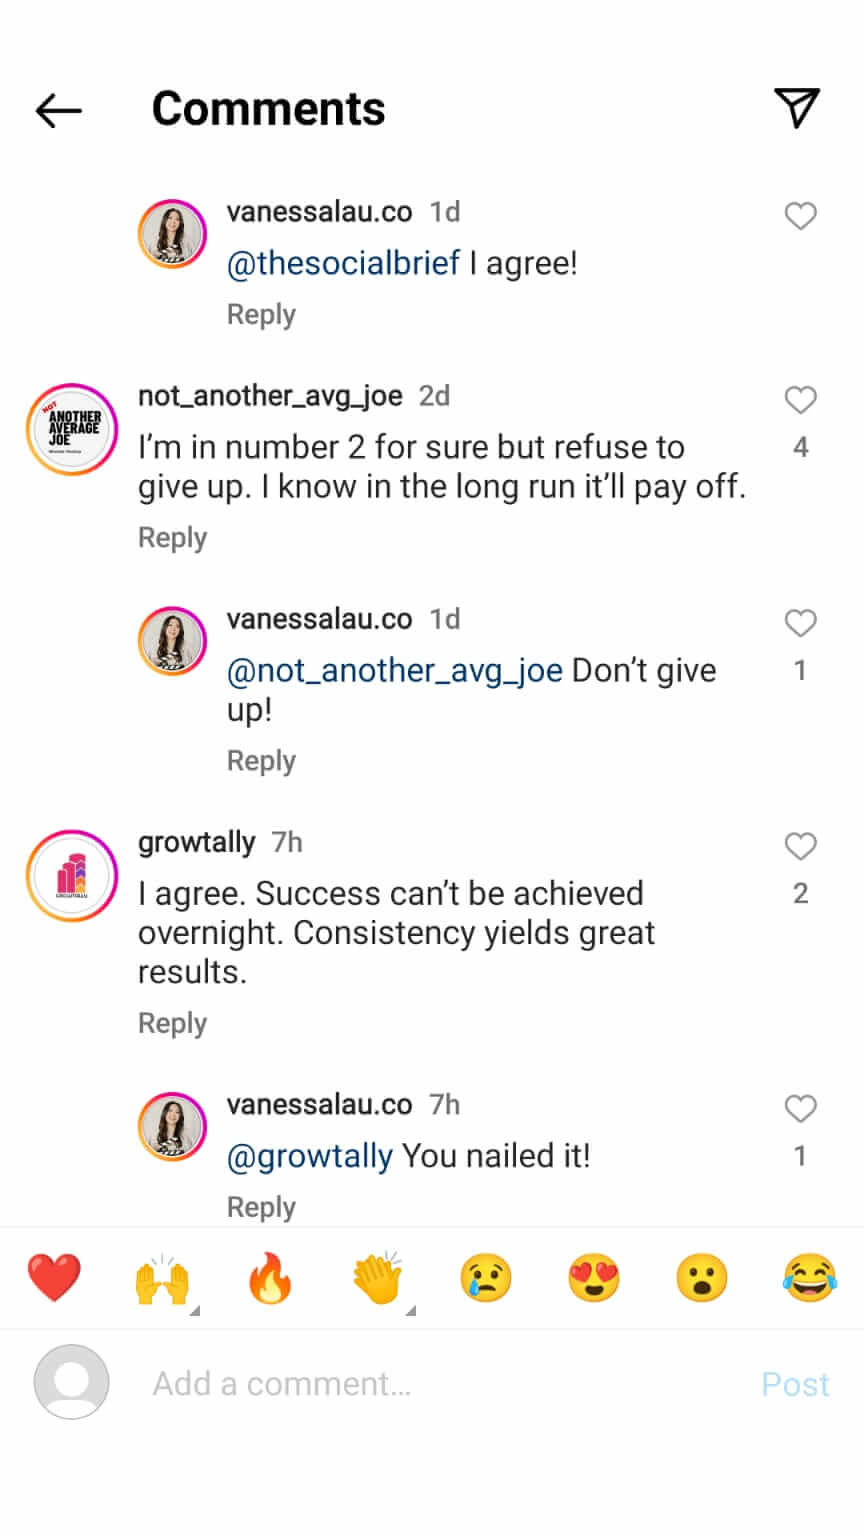 how-to-set-up-your-lead-sources-on-instagram-and-facebook-comments-on-a-feed-post-create-automatic-responses-and-randomize-them-example-2